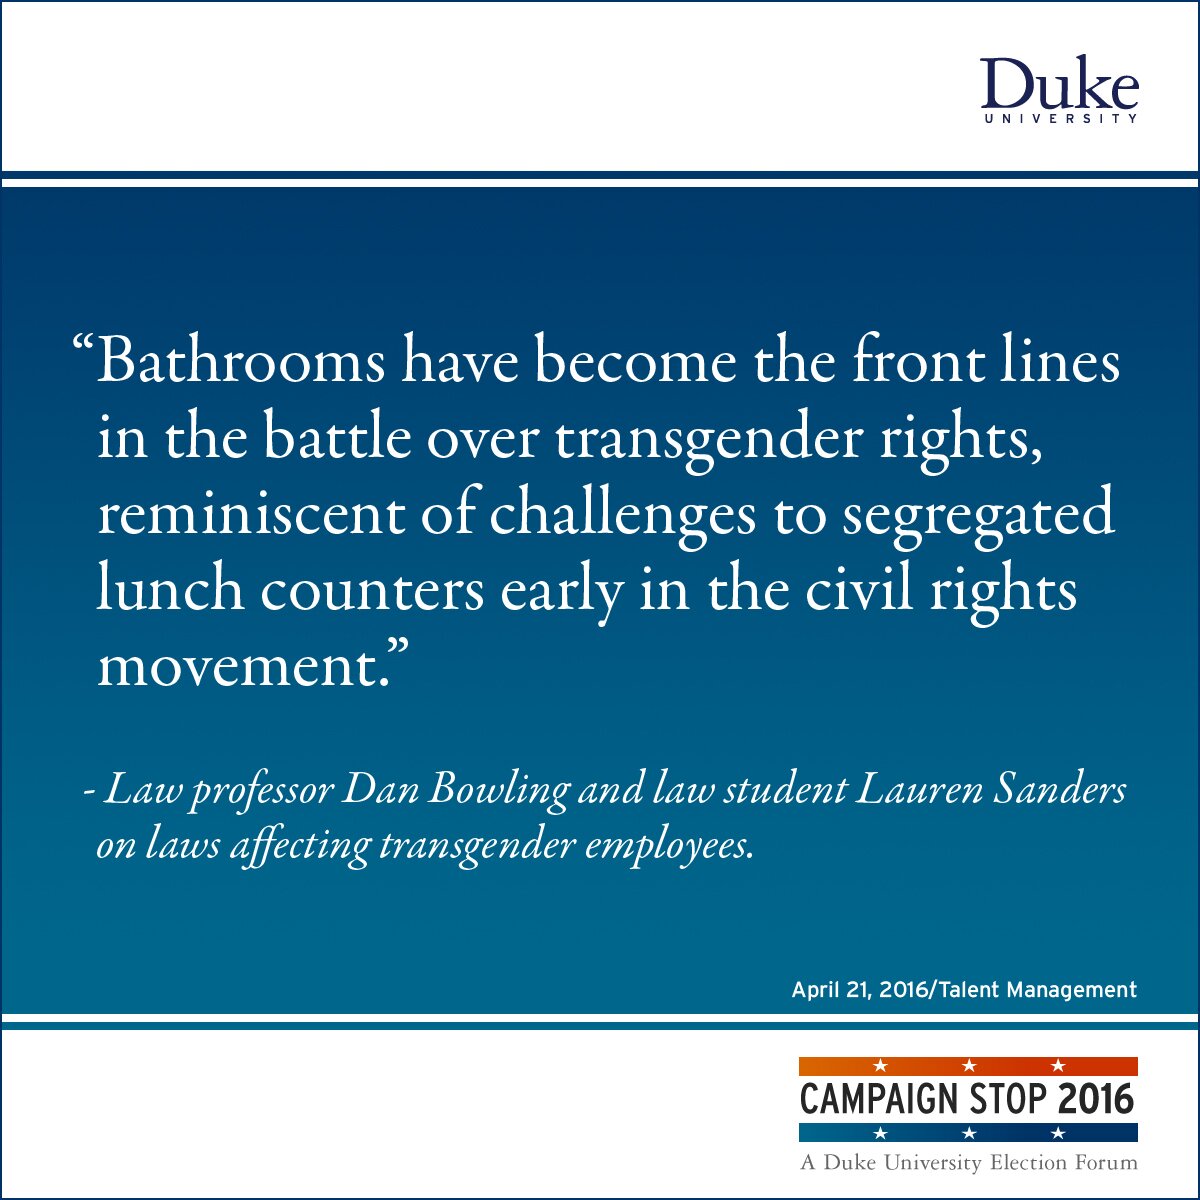 “Bathrooms have become the front lines in the battle over transgender rights, reminiscent of challenges to segregated lunch counters early in the civil rights movement.” - Law professor Dan Bowling and law student Lauren Sanders on laws affecting transgender employees.